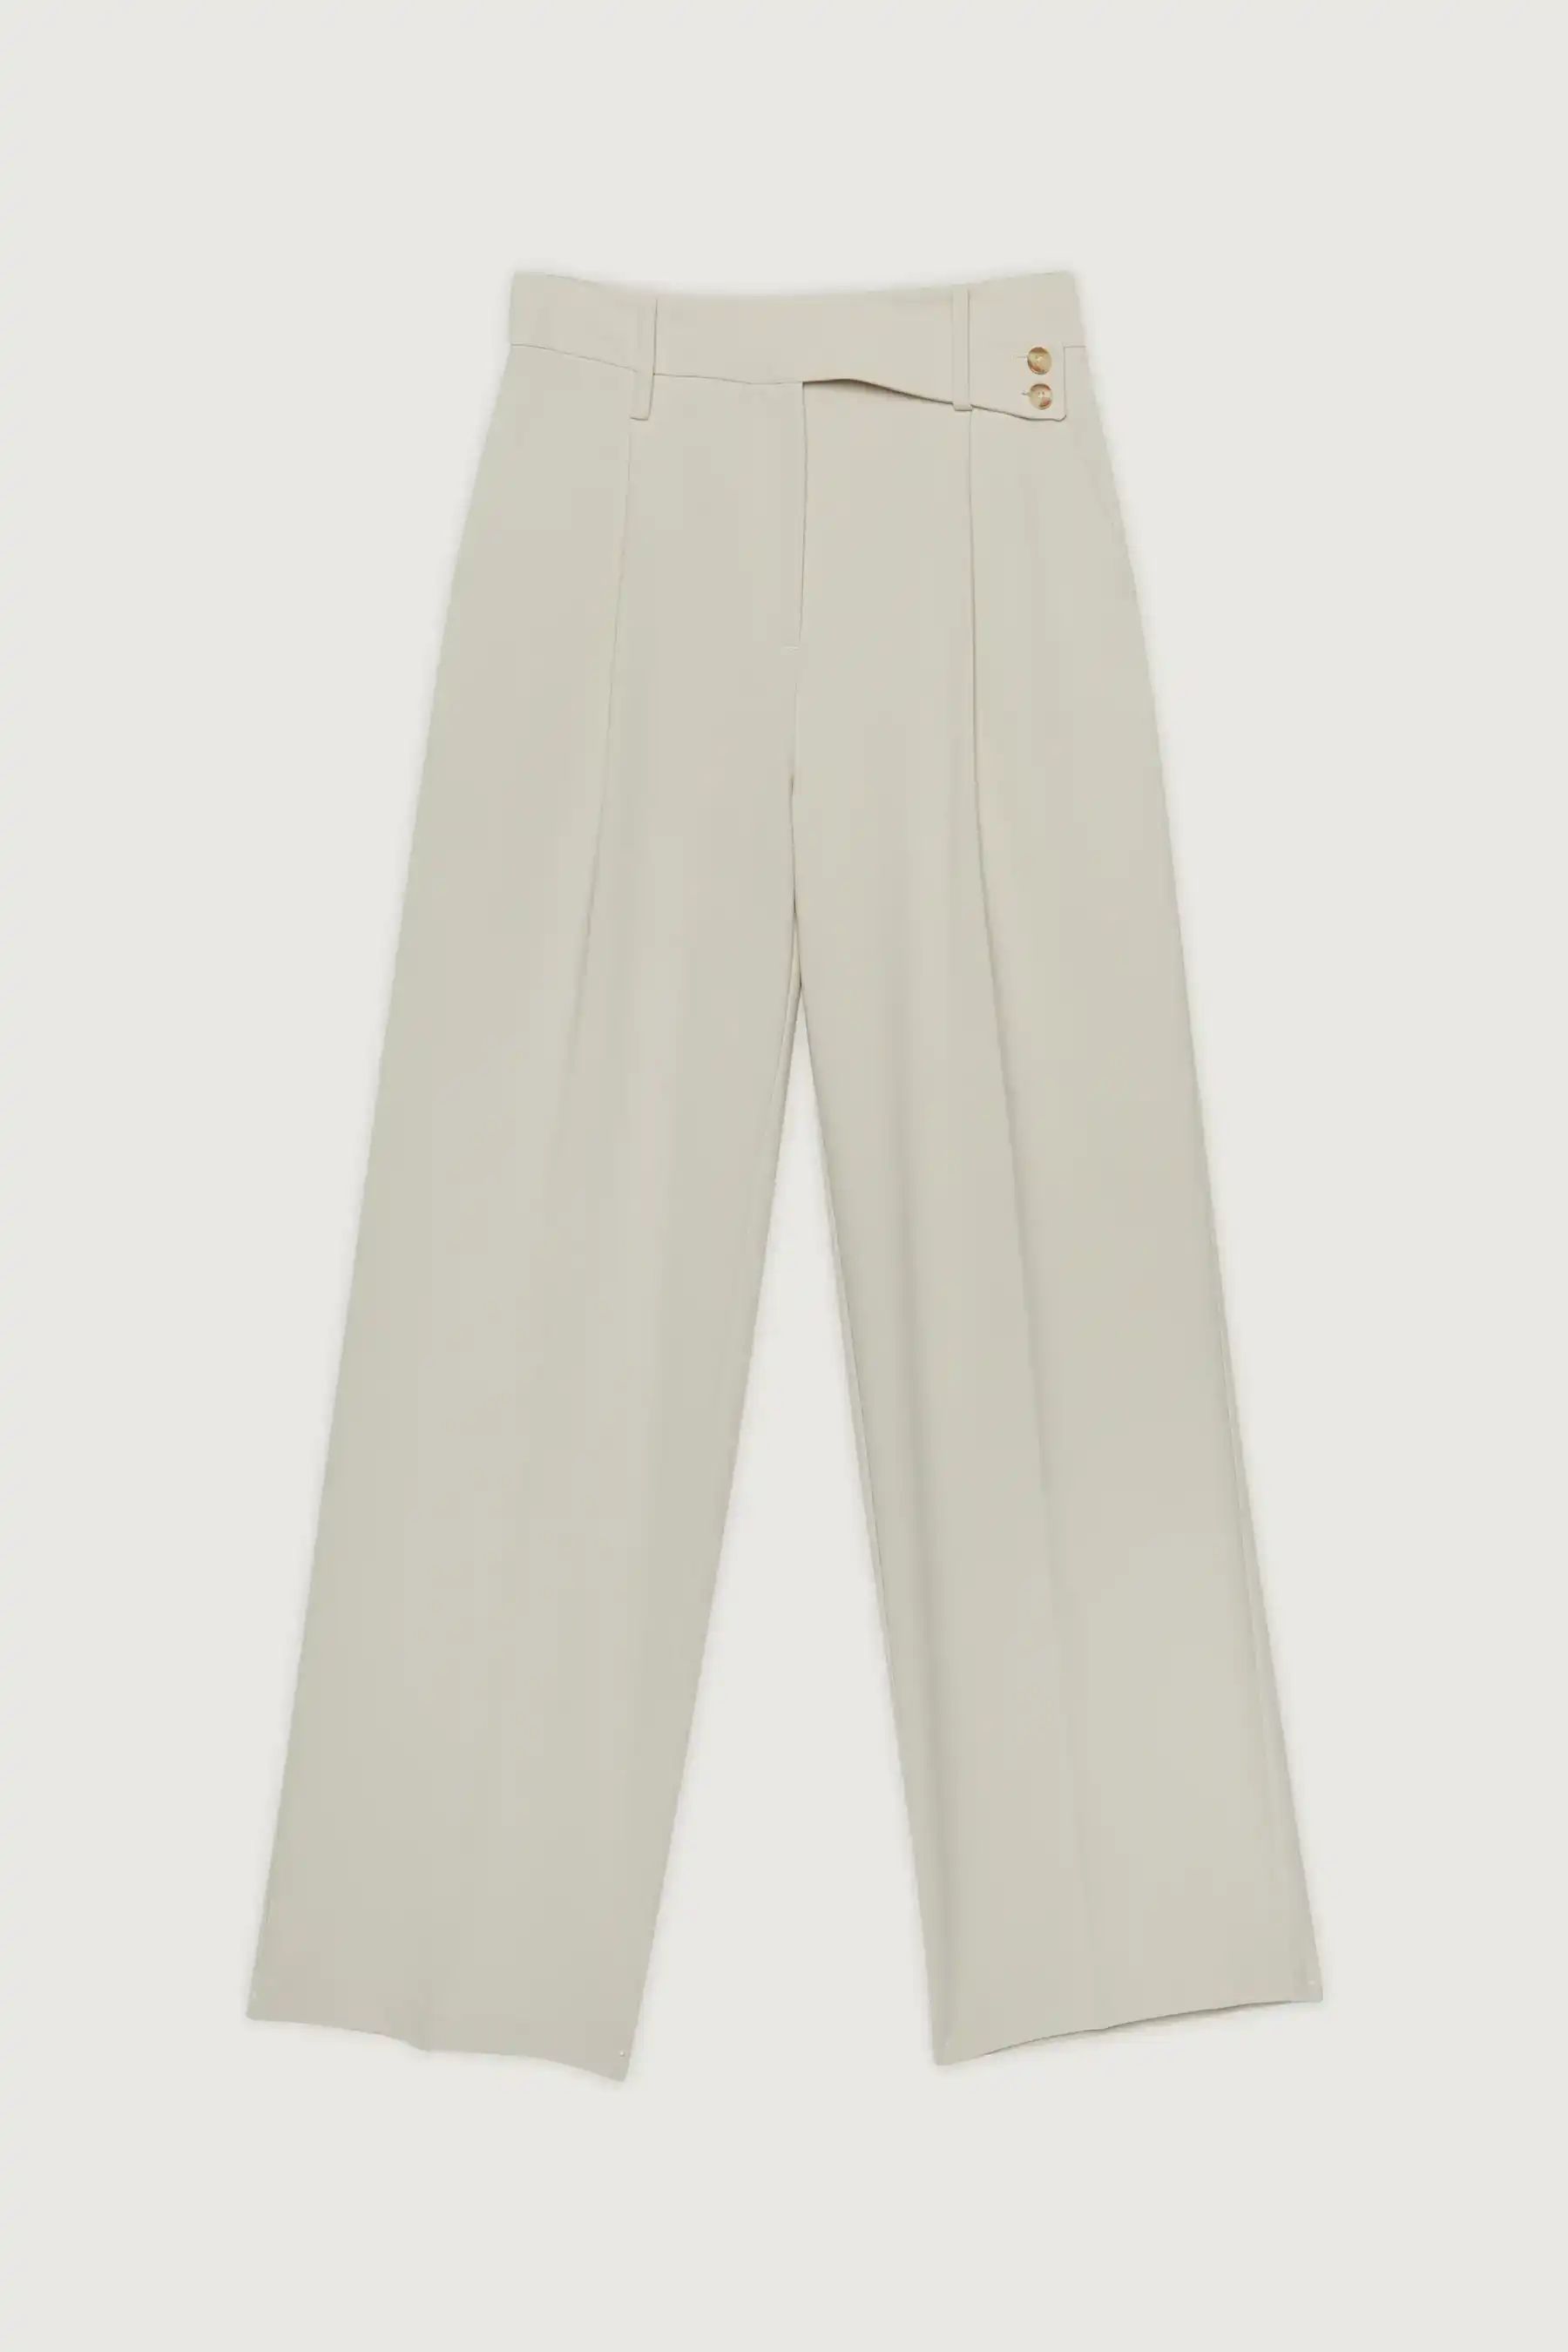 WIDE LEG CROSSOVER PANT        0.0 star rating   Write a review           $70.40     Flash Sale -... | OAK + FORT